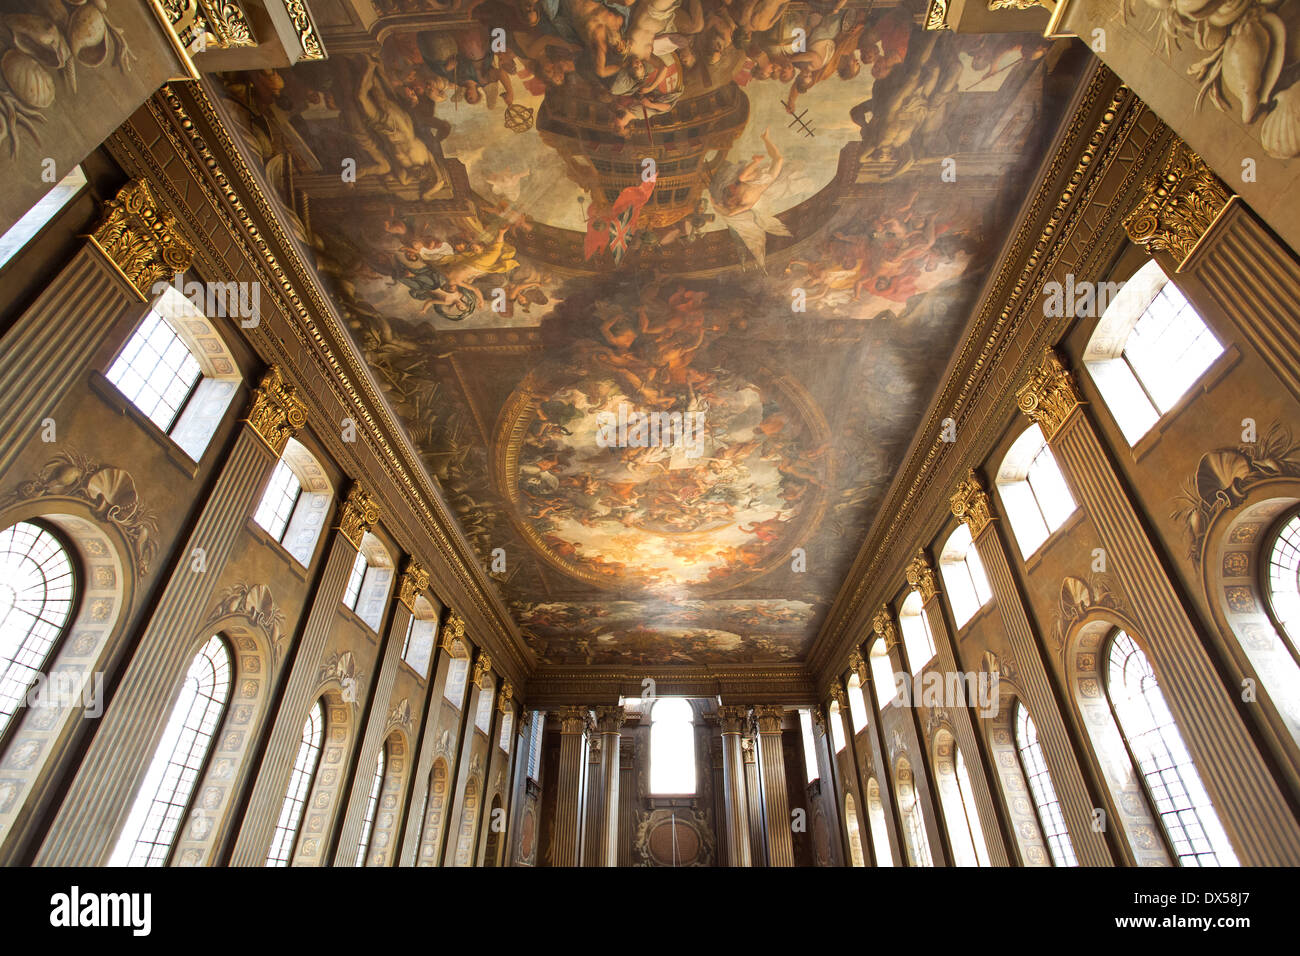 Tha Painted Hall in Greenwich. The hall is part of the Old Royal Naval College. Stock Photo